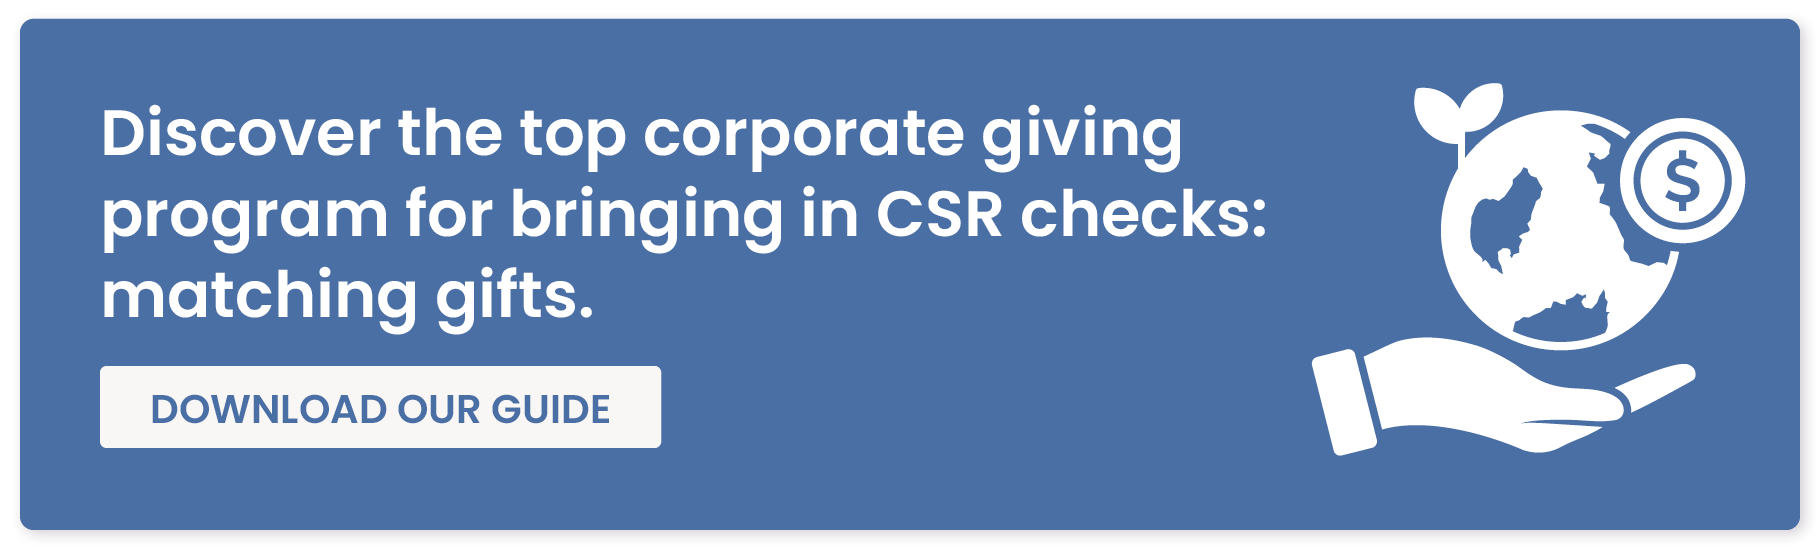 Discover the top corporate giving program for bringing in CSR checks: matching gifts. Download our guide.